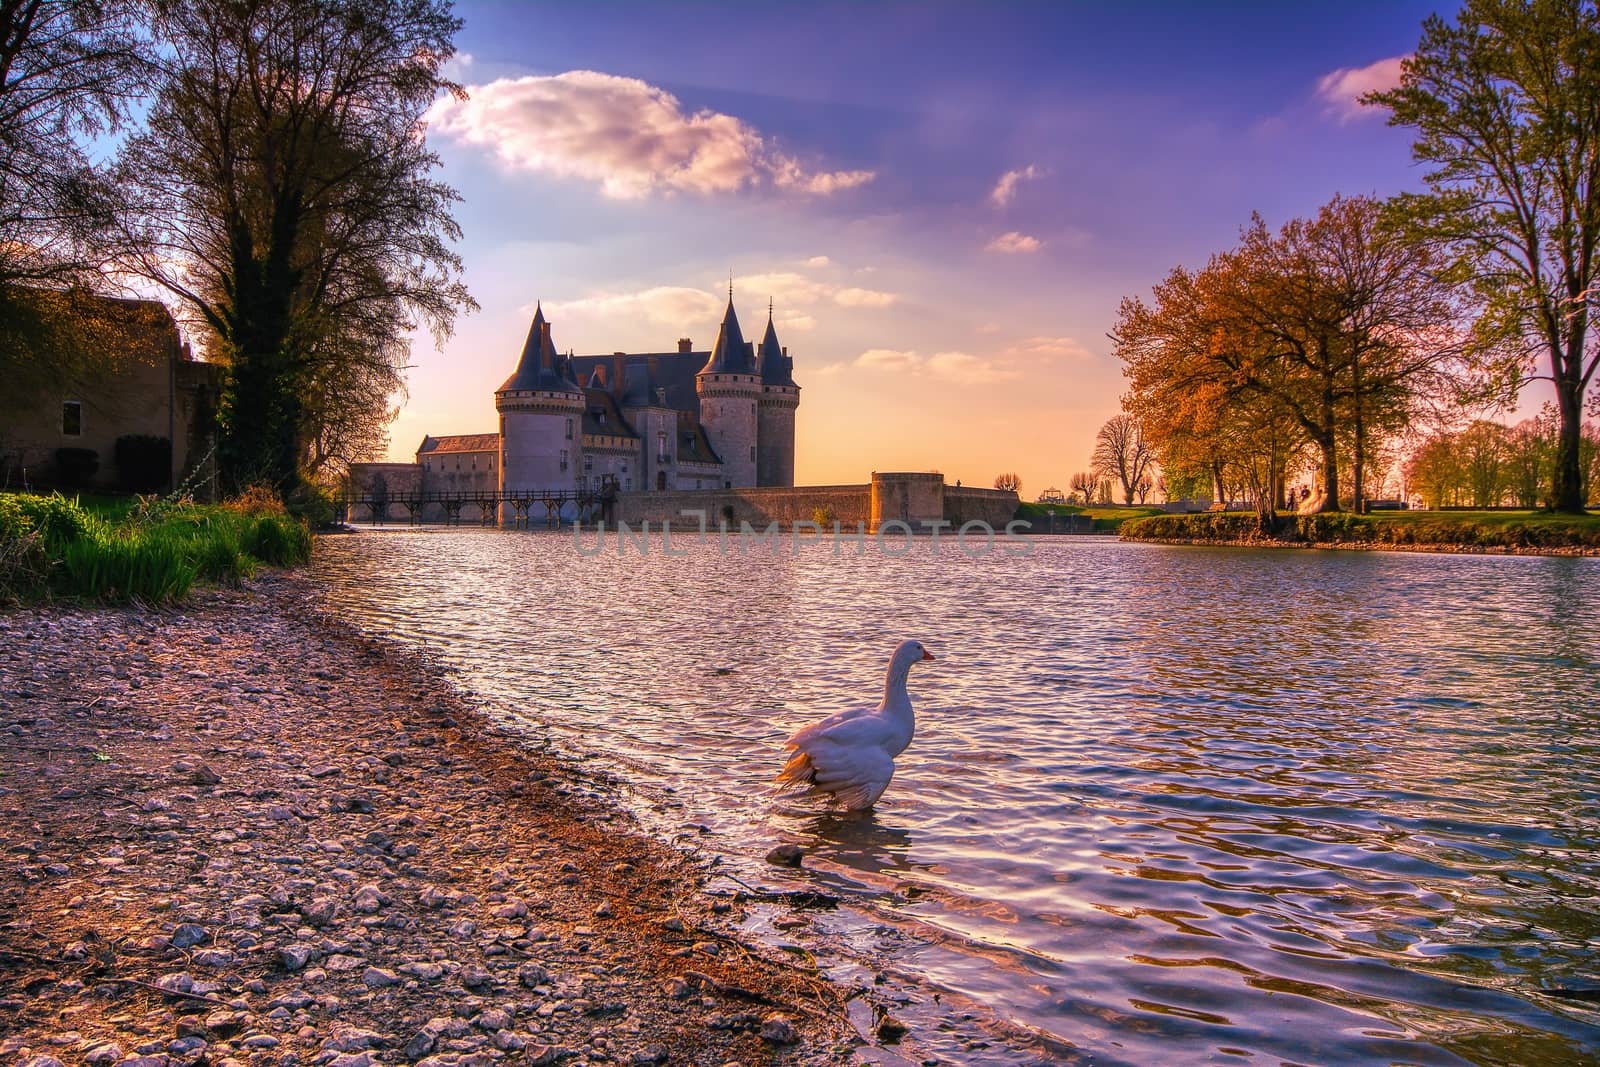 Sully Sur Loire, France - April 13, 2019: Famous medieval castle Sully sur Loire at sunset, Loire valley, France. The chateau Sully sur Loire dates from the end of the 14th century and is a prime example of medieval fortress.